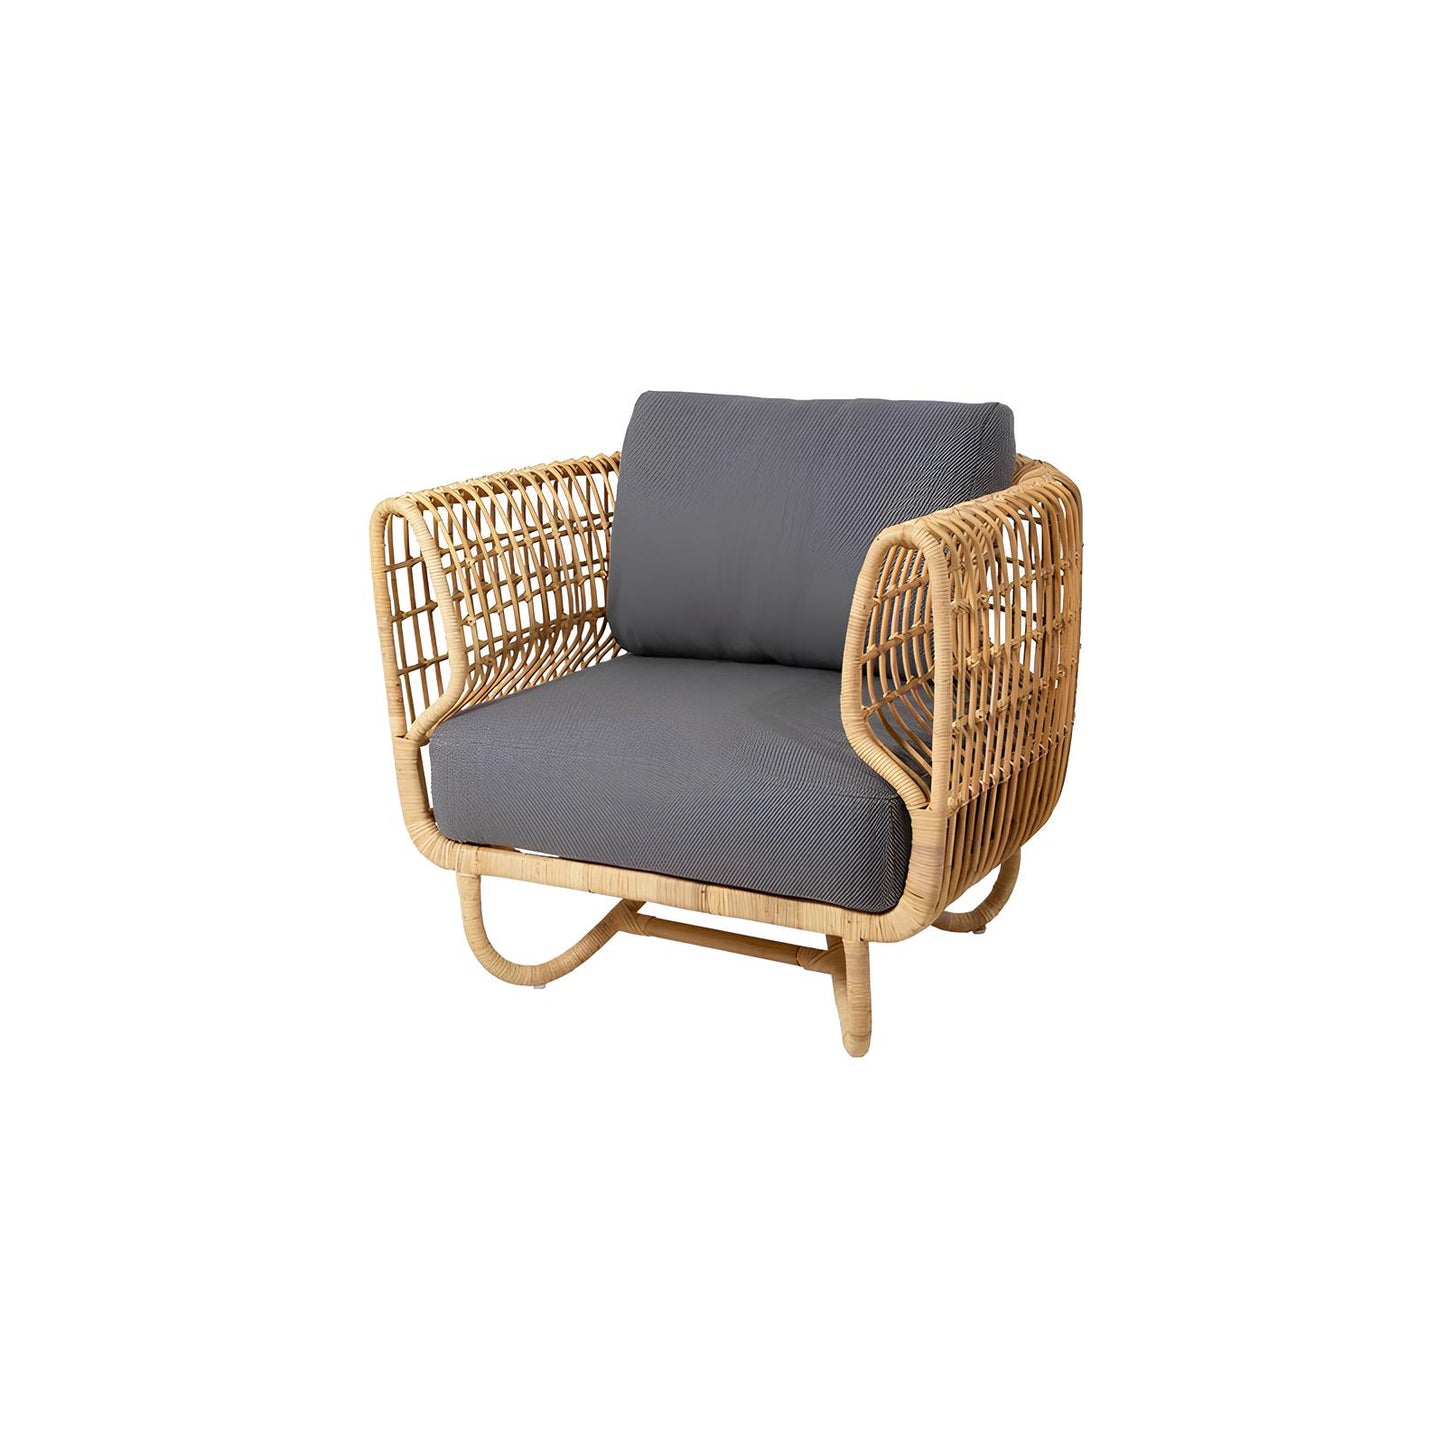 Cane chairs for Lounge | Bamboo Chairs for Living rooms- Kashvi - Akway